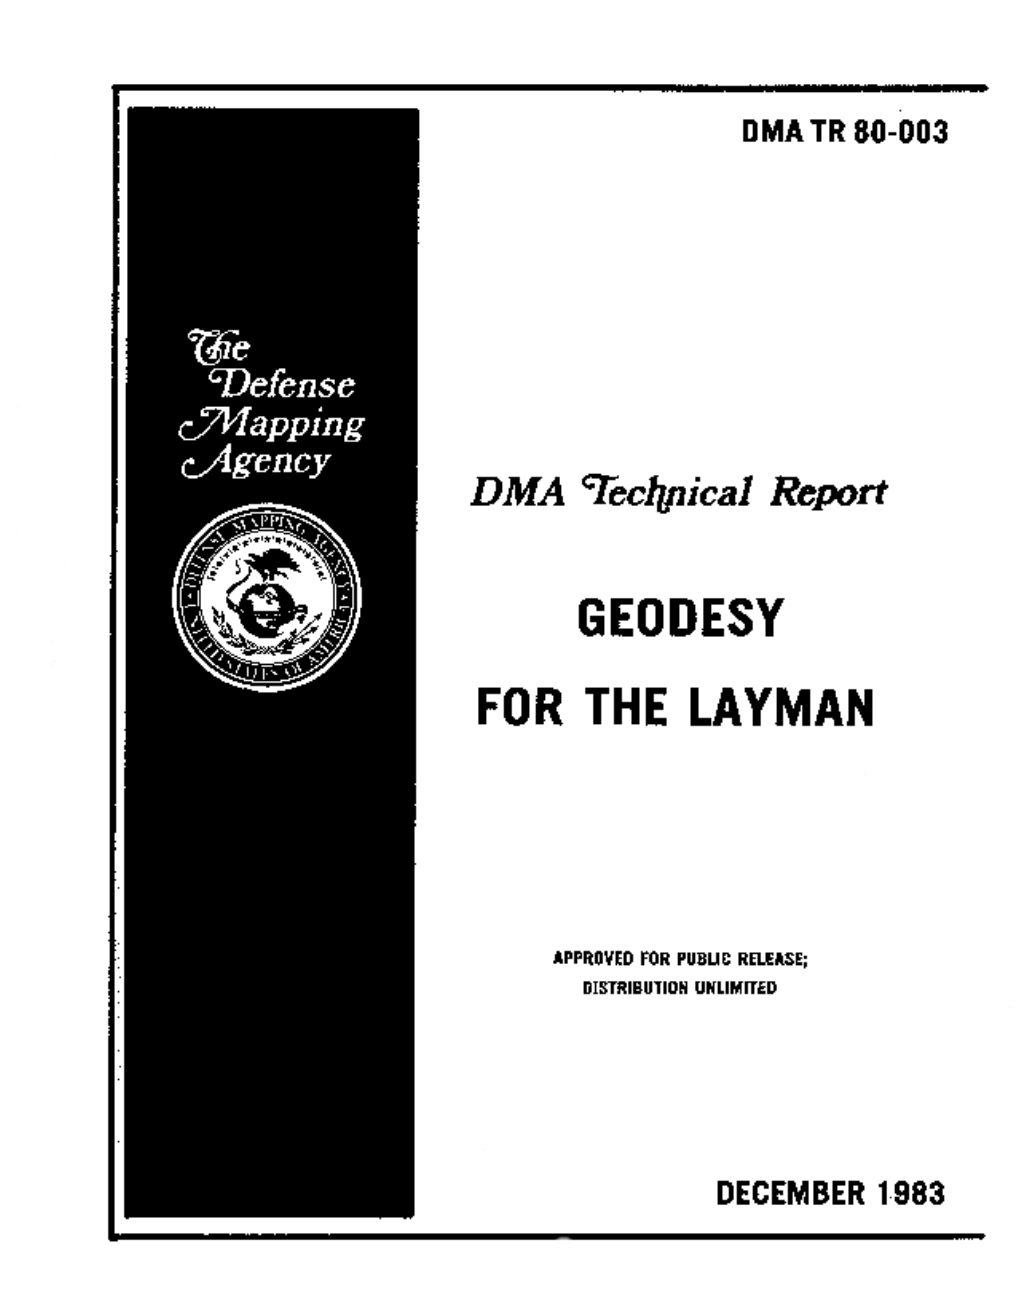 GEODESY for the LAYMAN DEFENSE MAPPING AGENCY BUILDING 56 U S NAVAL OBSERVATORY DMA TR 80-003 WASHINGTON D C 20305 16 March 1984